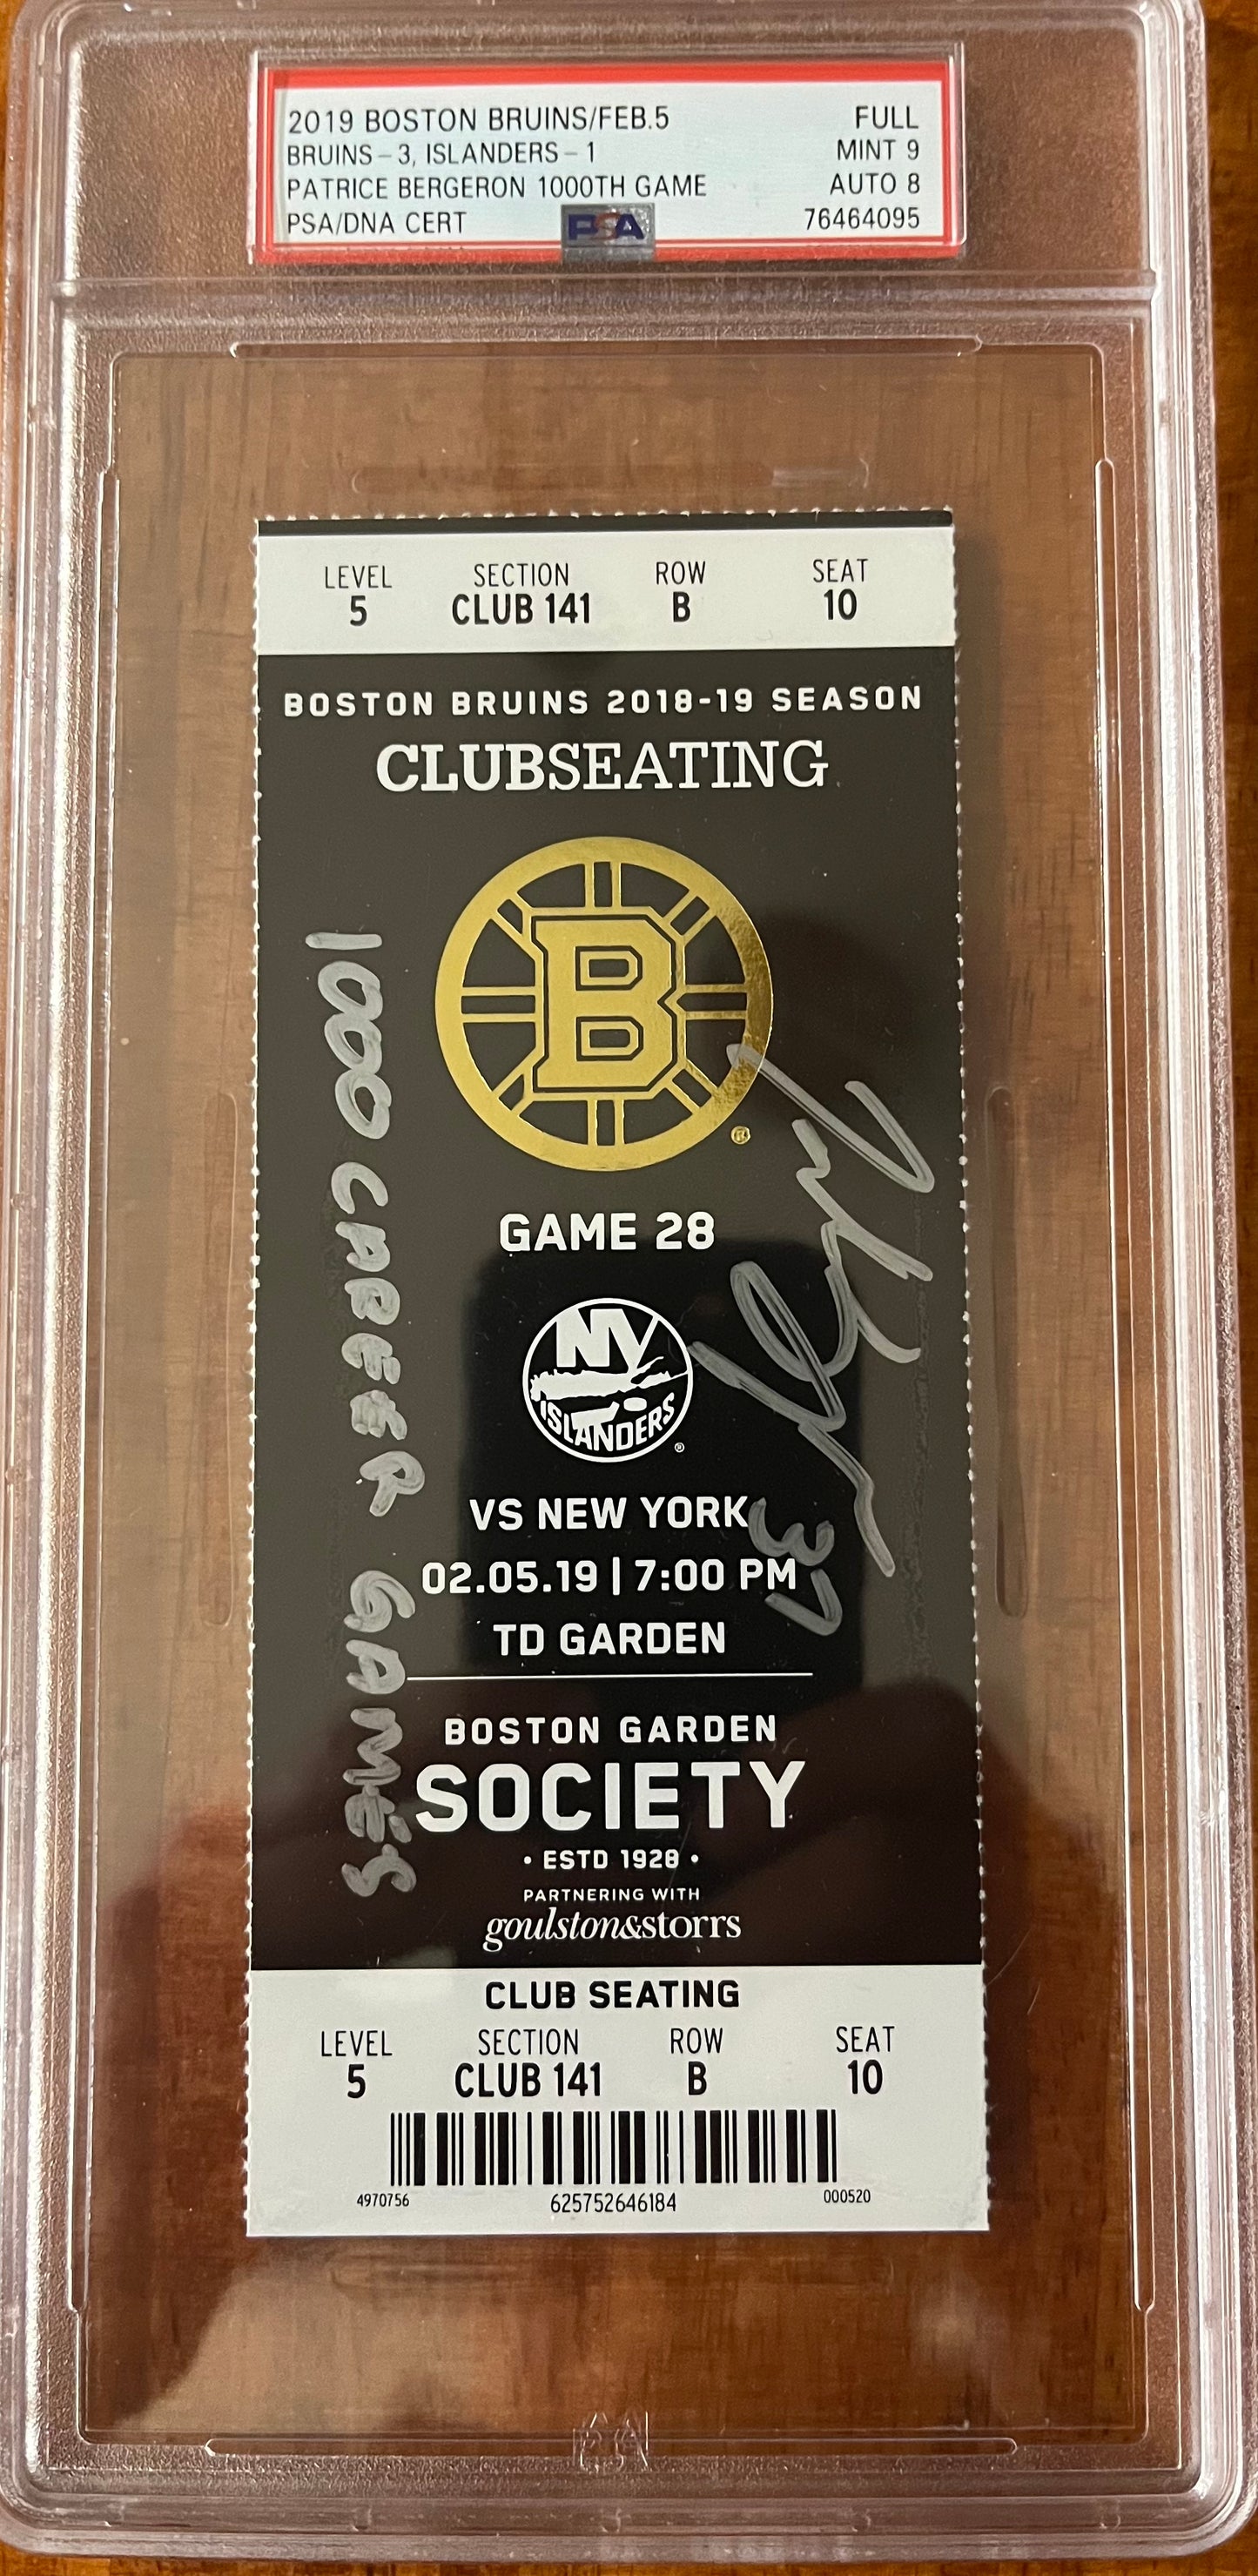 Bruins Patrice Bergeron signed and PSA/DNA slabbed graded 1000th game ticket RARE